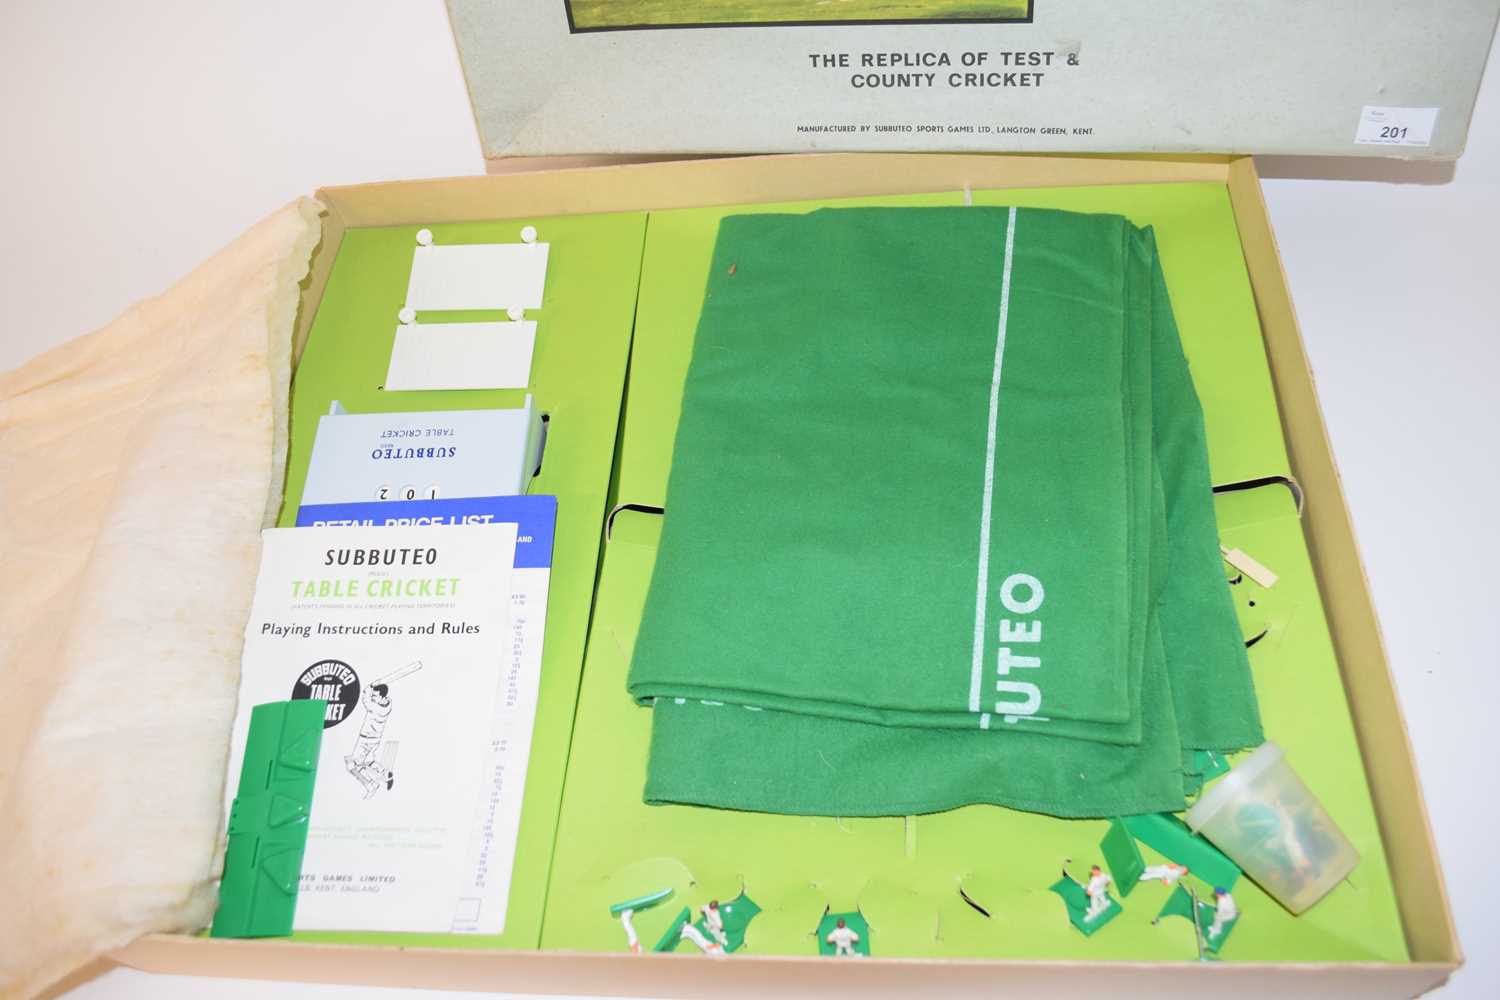 Subbuteo Test Match Edition table cricket circa 1960s in original box with contents - Image 2 of 2